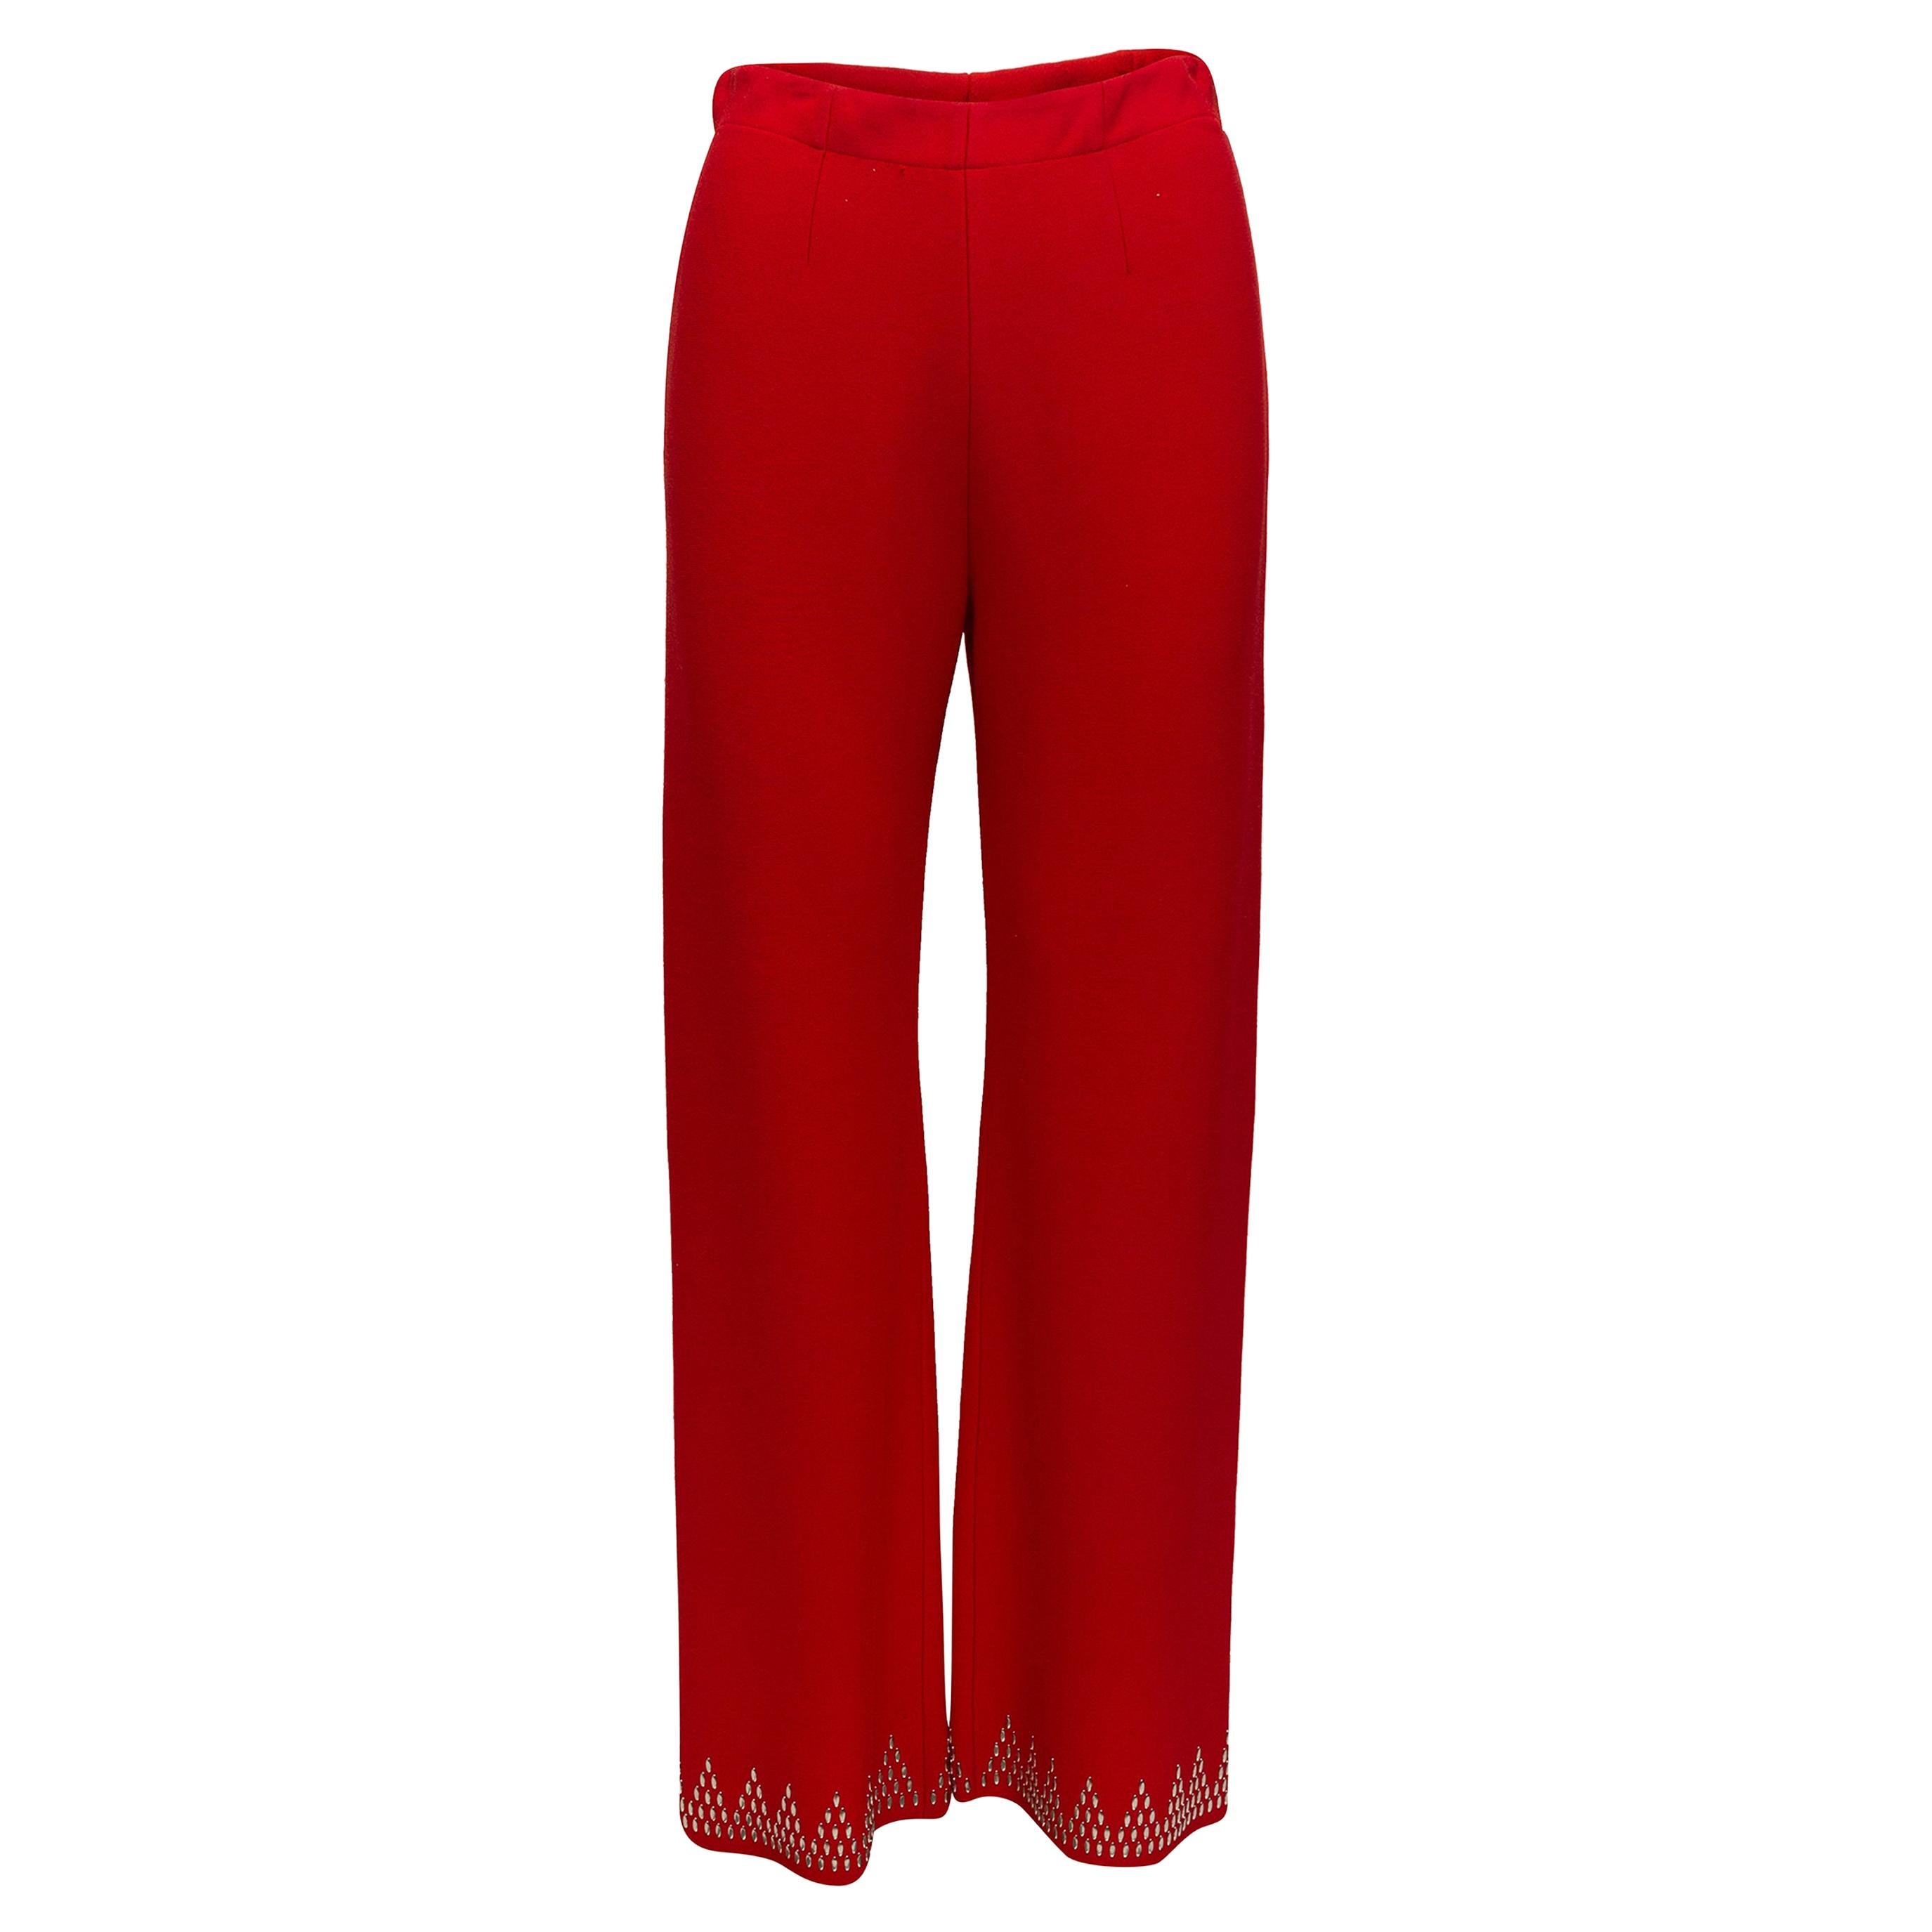 Alaia Red High-Rise Embellished Pants